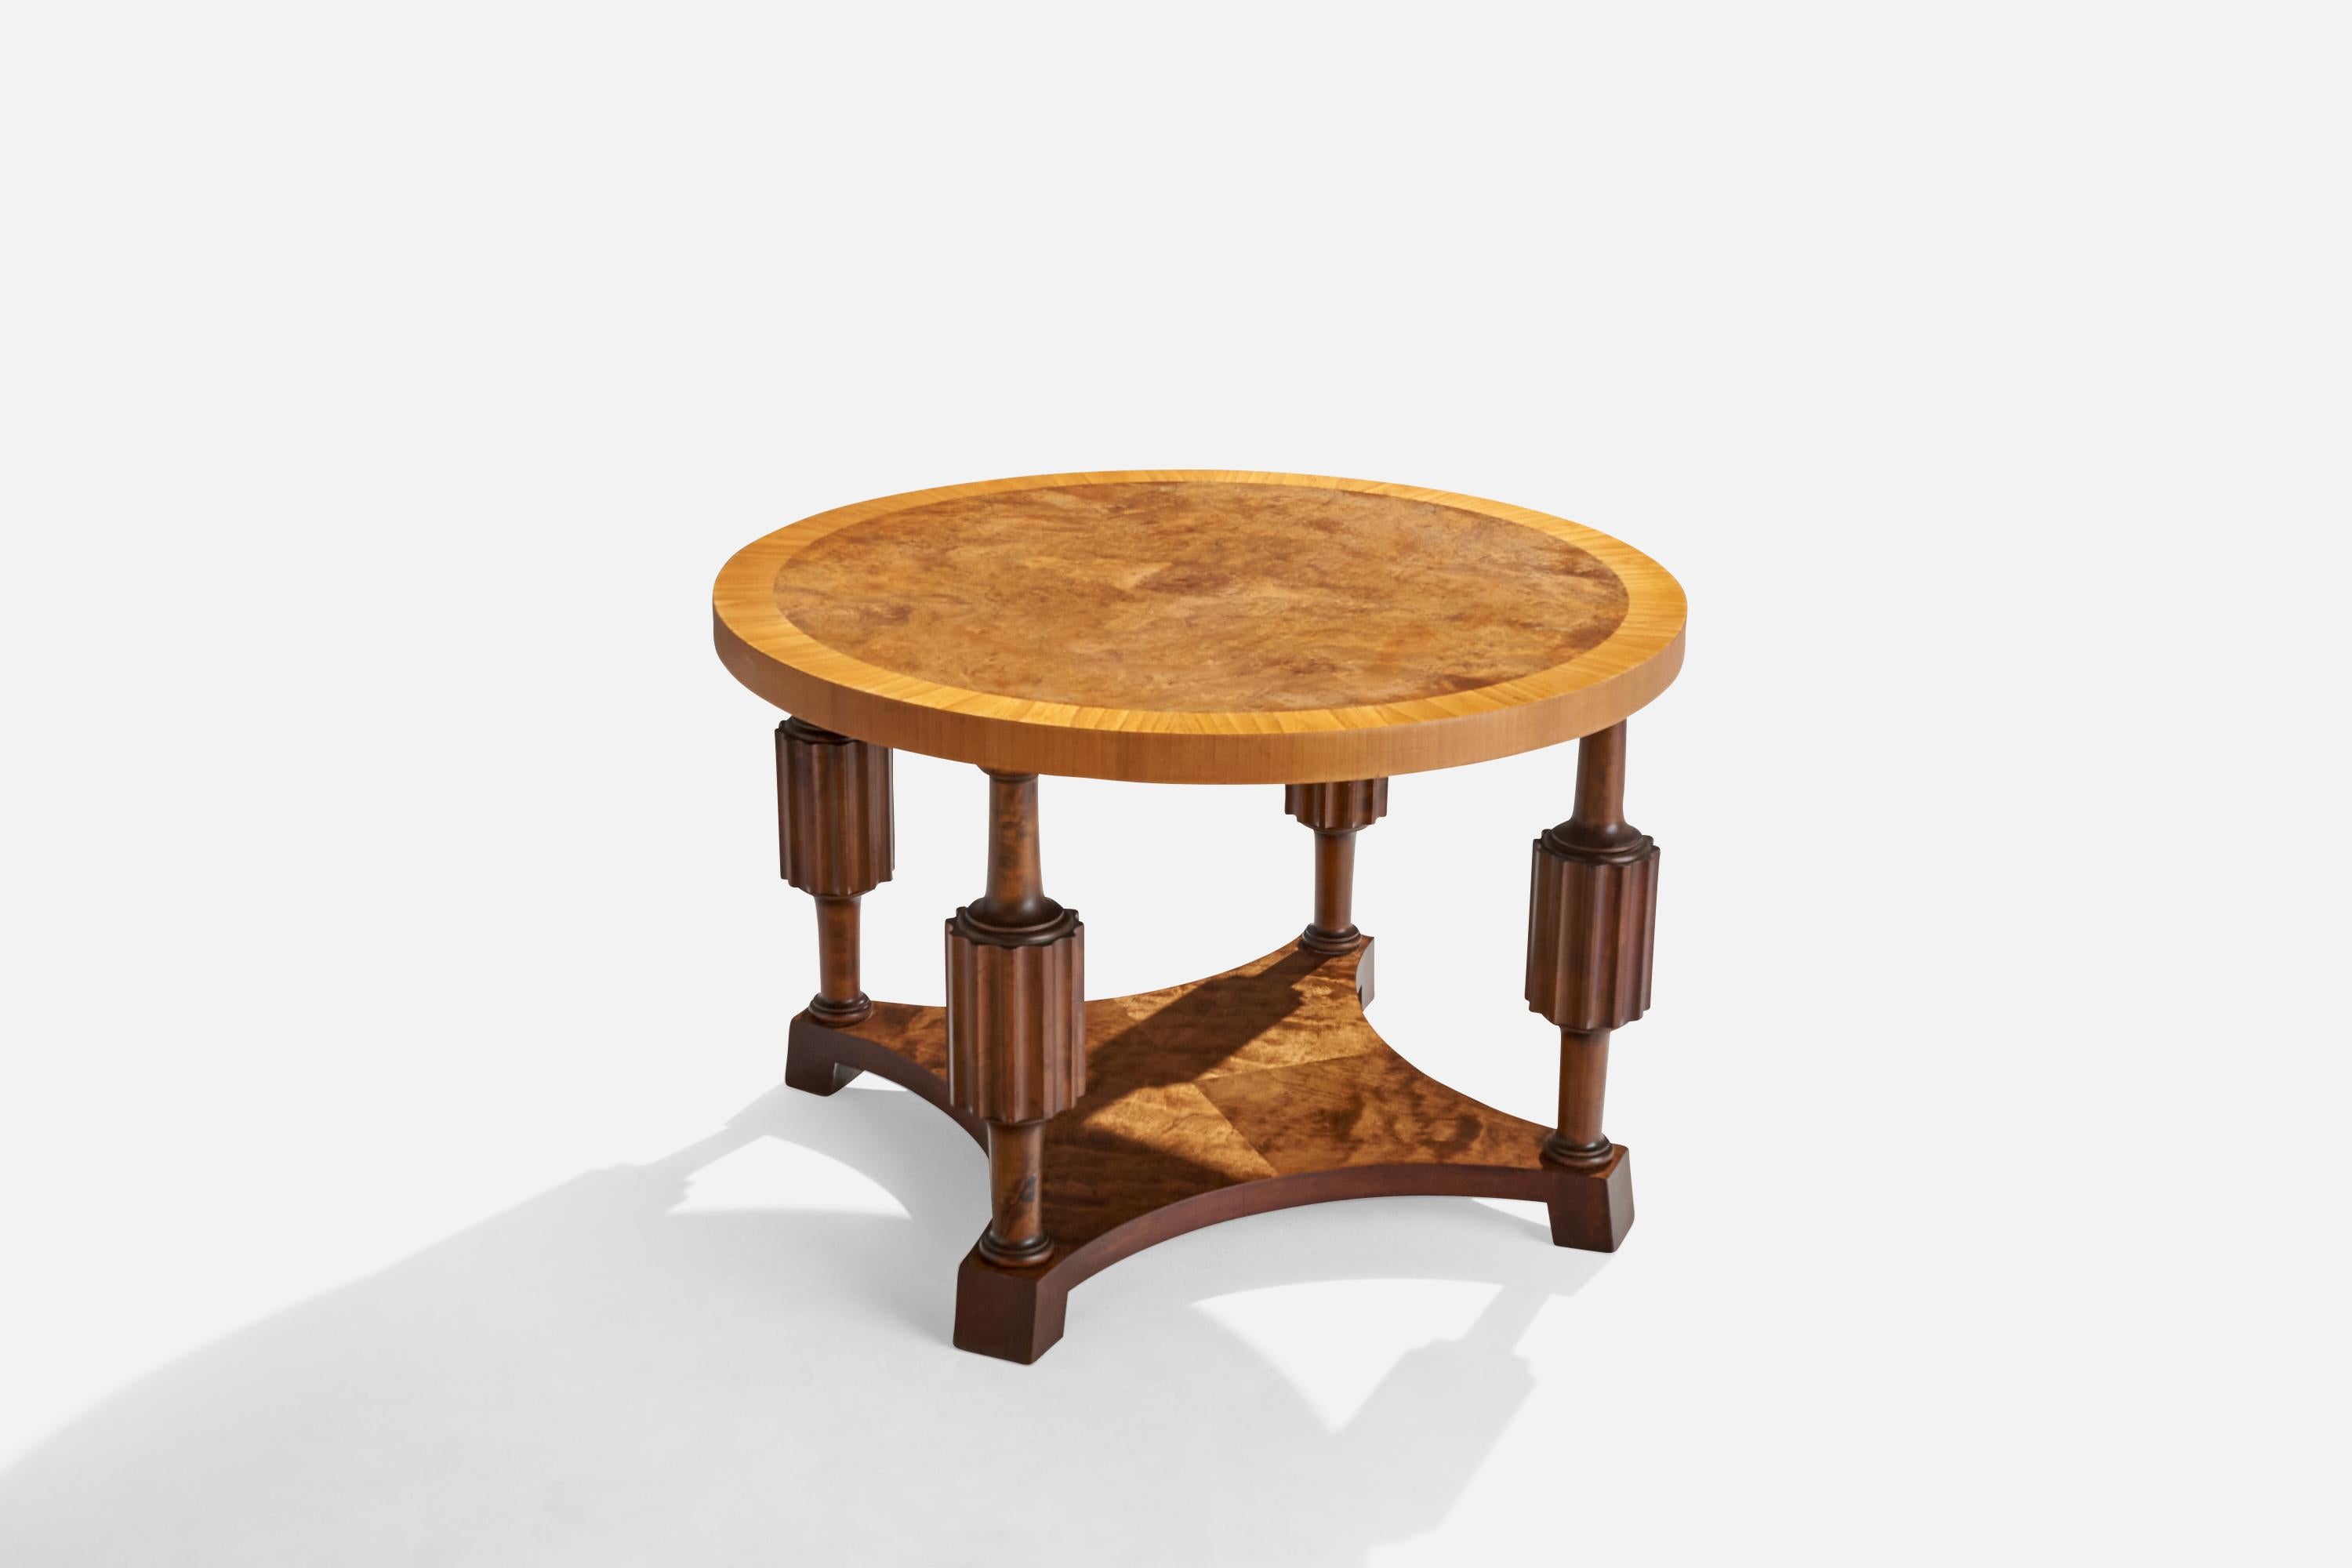 A birch side table or coffee table designed and produced in Sweden, c. 1930s.